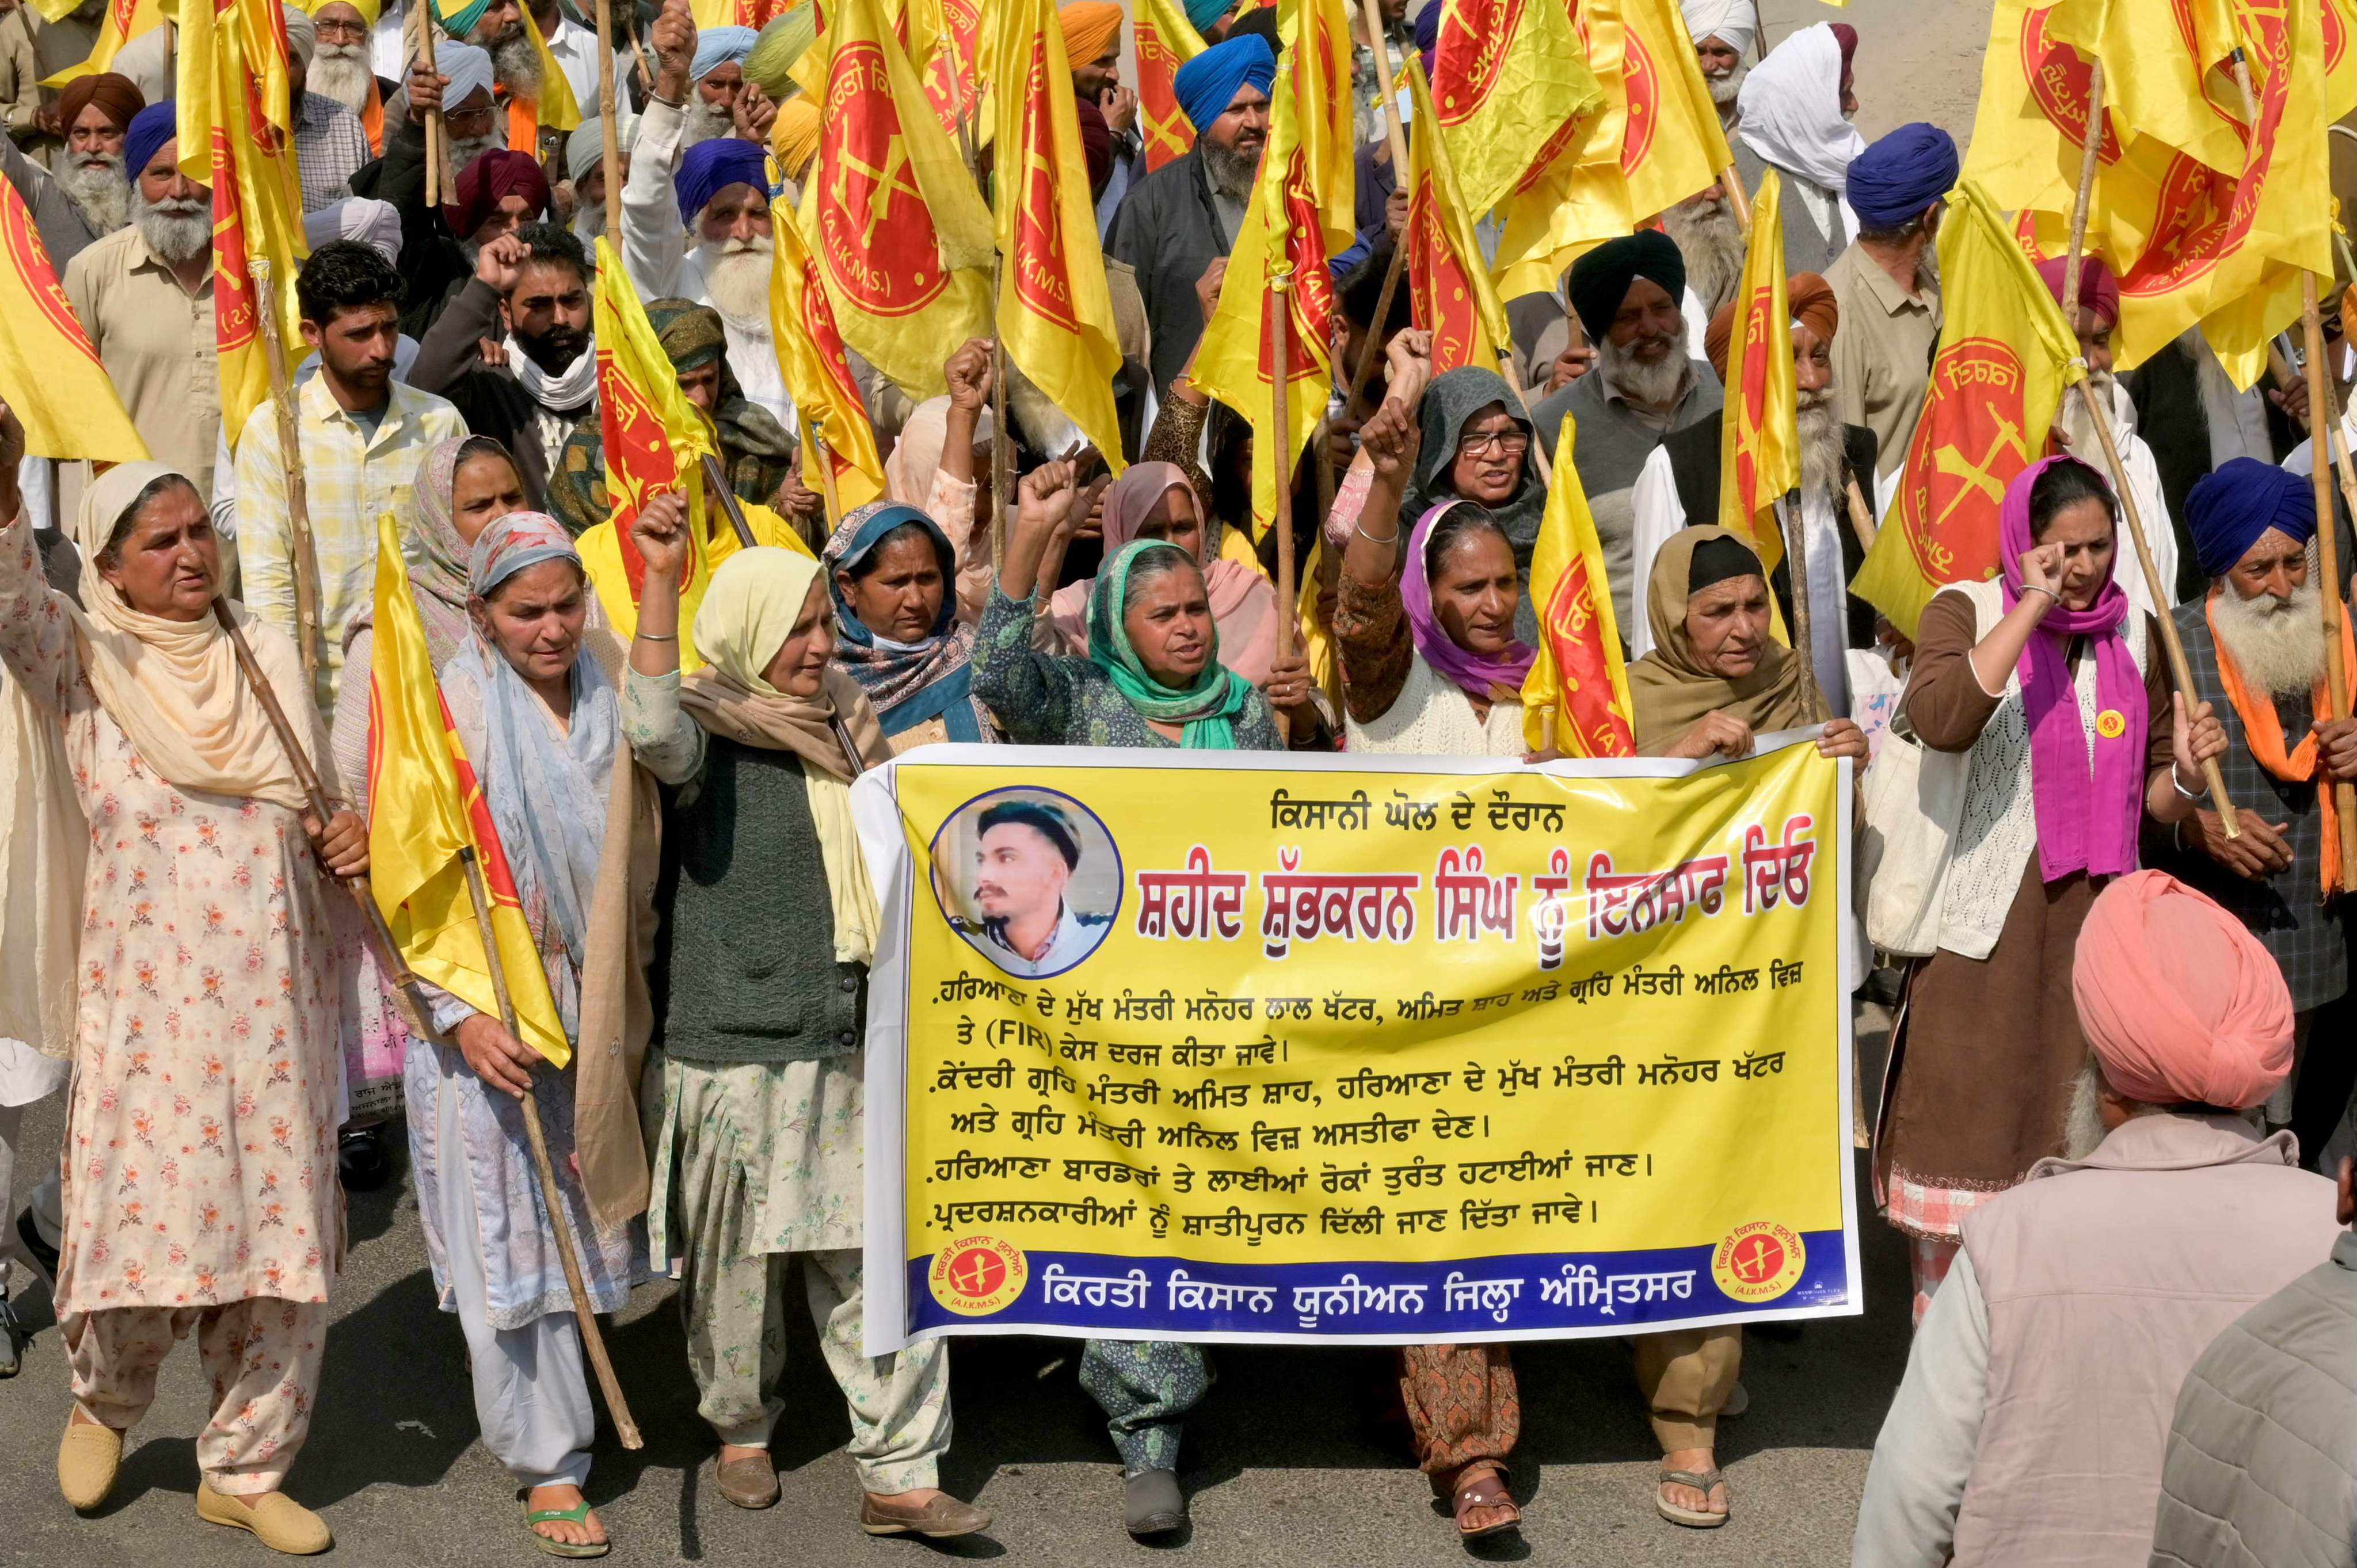 Farmers shout slogans during a demonstration in Amritsar on February 29 to seek justice for Shubhkaran Singh, a farmer who lost his life amid the ongoing farmers protest. Photo: AFP 